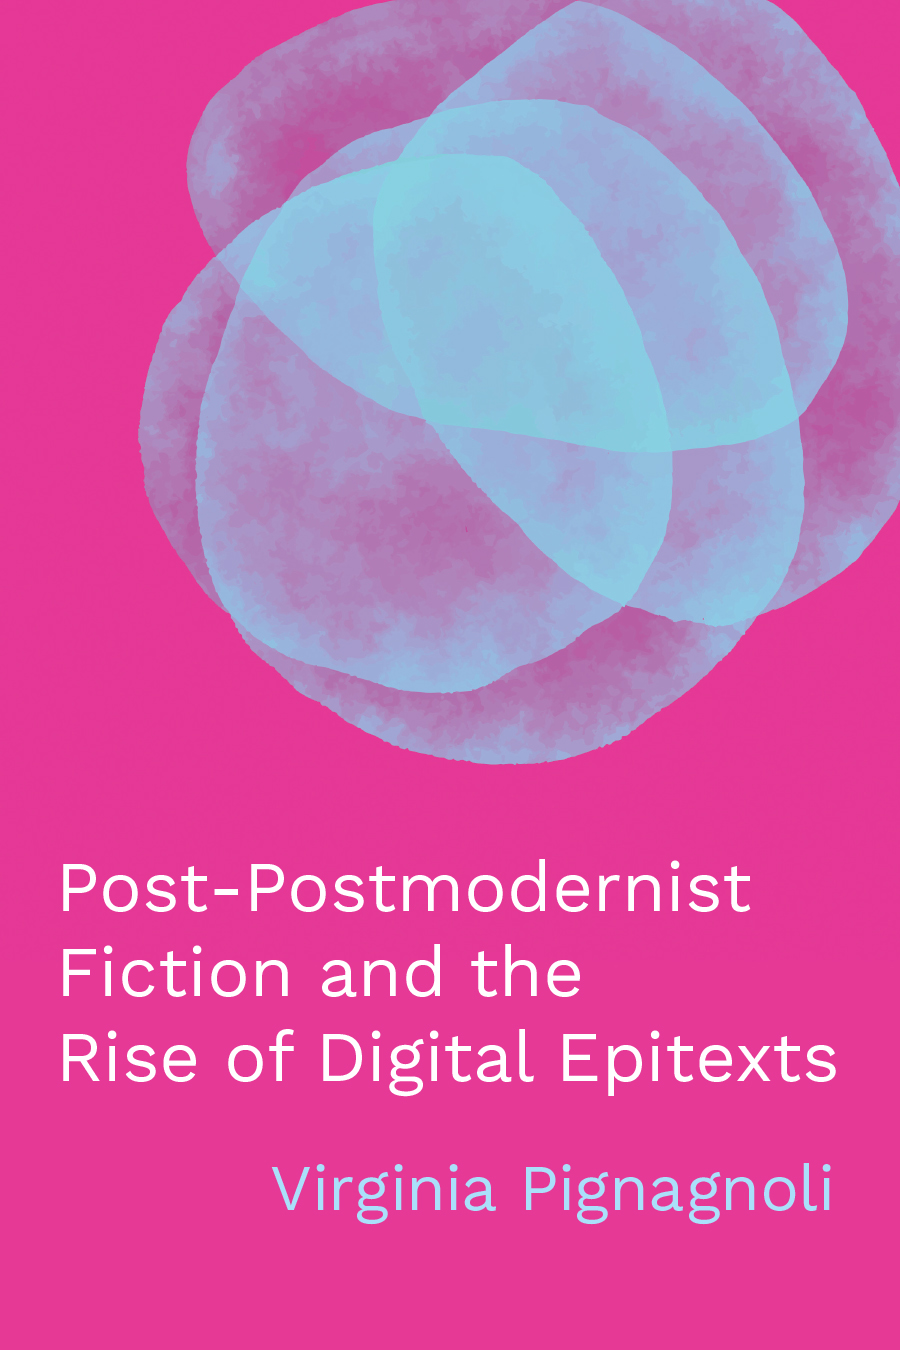 Front cover of Post-Postmodernist Fiction and the Rise of Digital Epitexts by Virginia Pignagnoli, featuring overlapping pale blue circles on a bright pink background.